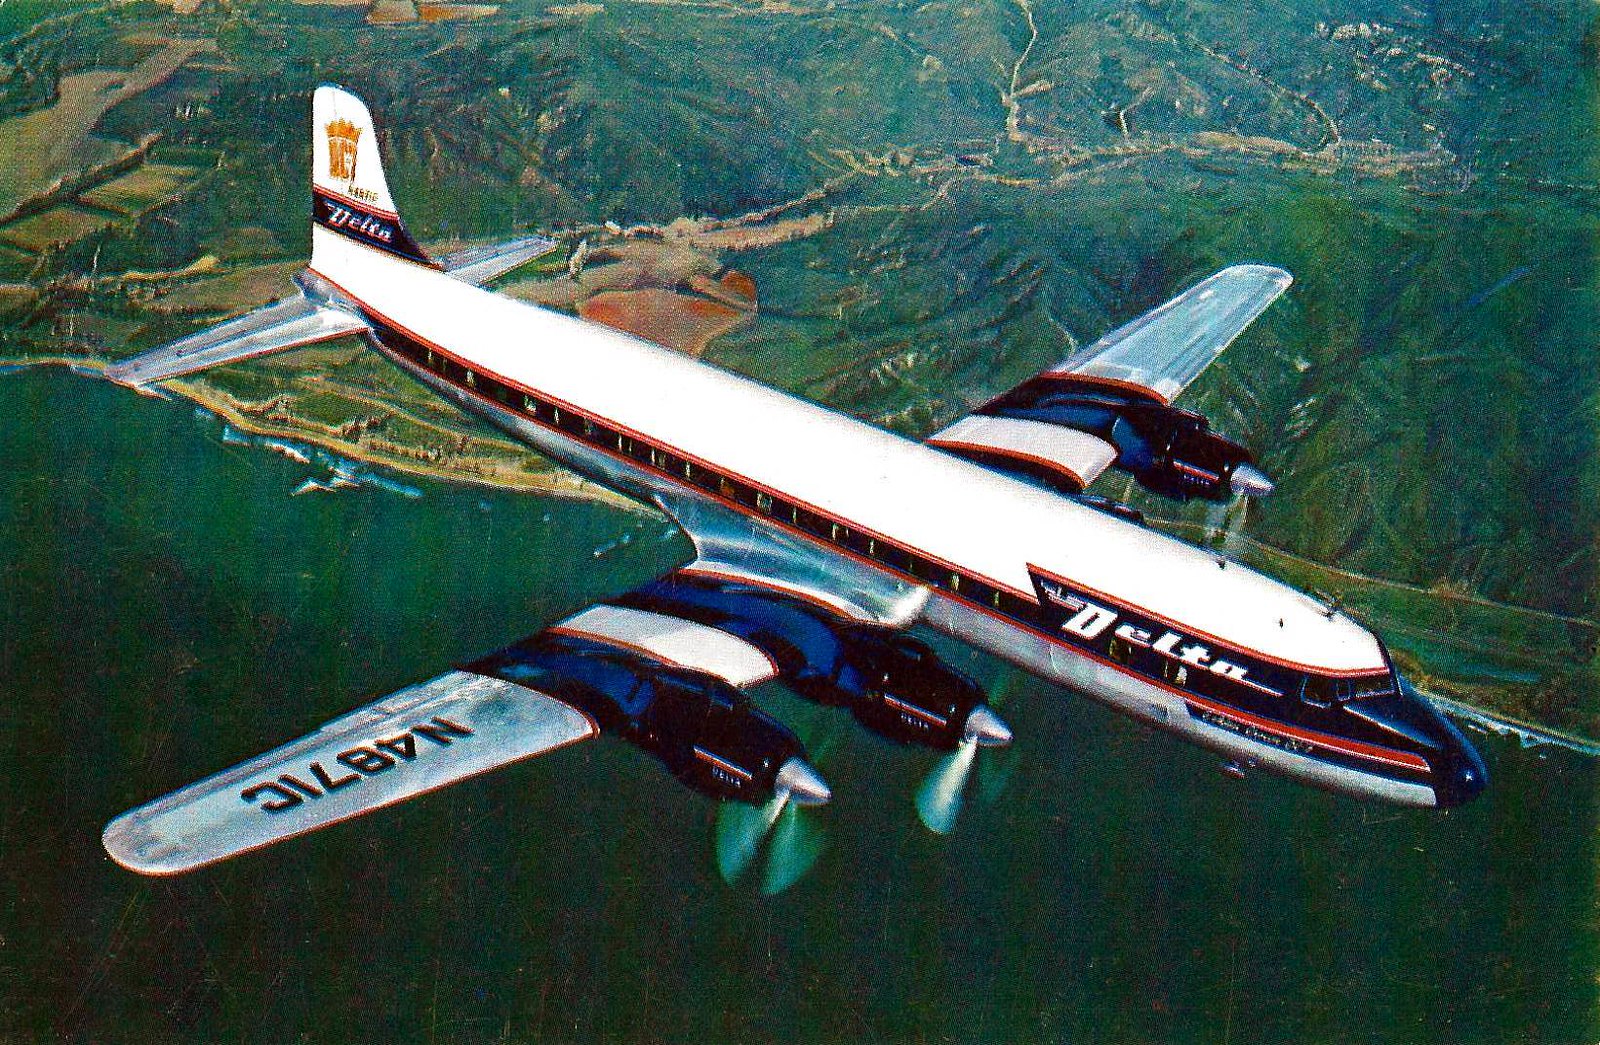 Vintage Delta DC-7 Airliner Postcard, Delta - One Of America's Pioneer Scheduled Airlines, Douglas DC-7 1954 - 1968